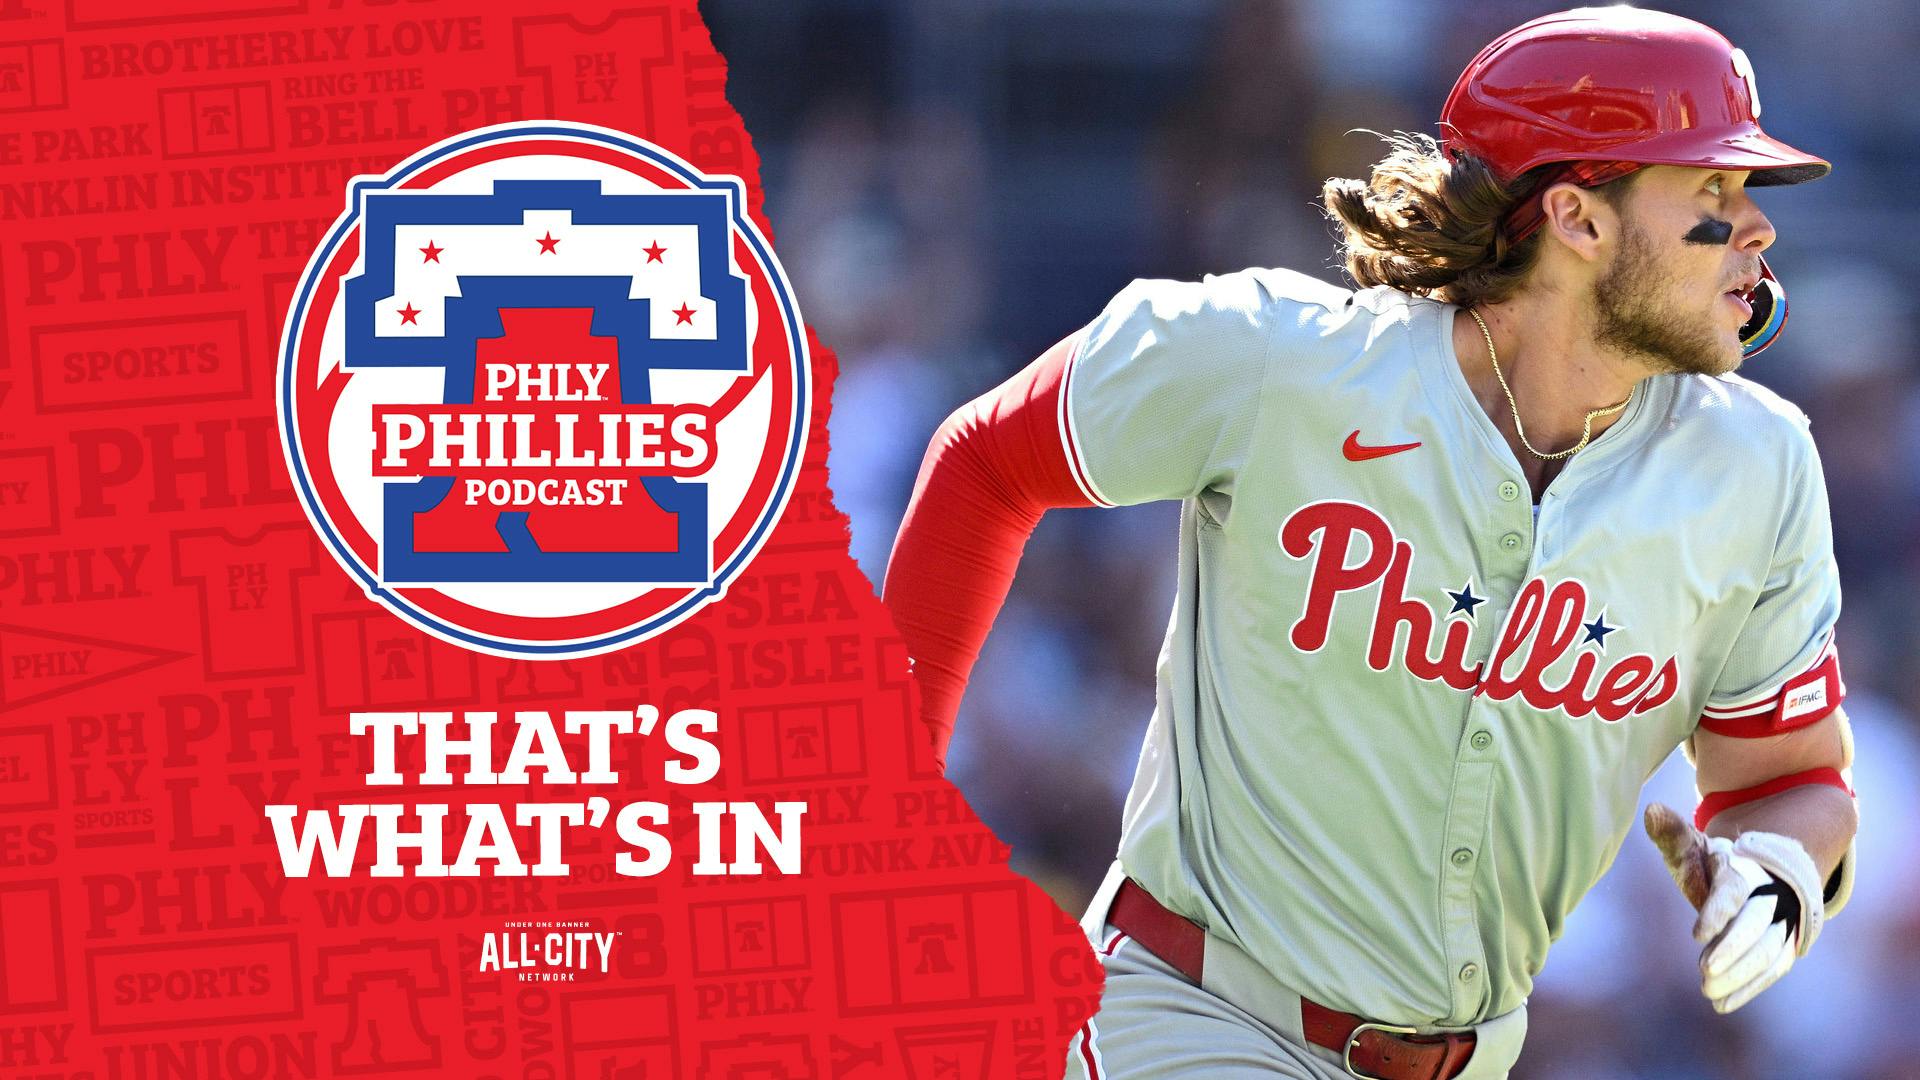 PHLY Phillies Podcast | Alec Bohm extends hitting streak, Taijuan Walker returns, as the Phillies sweep the Padres